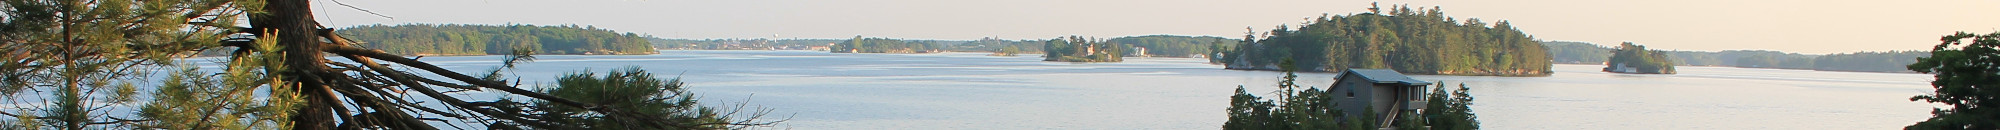 St.Lawrence River